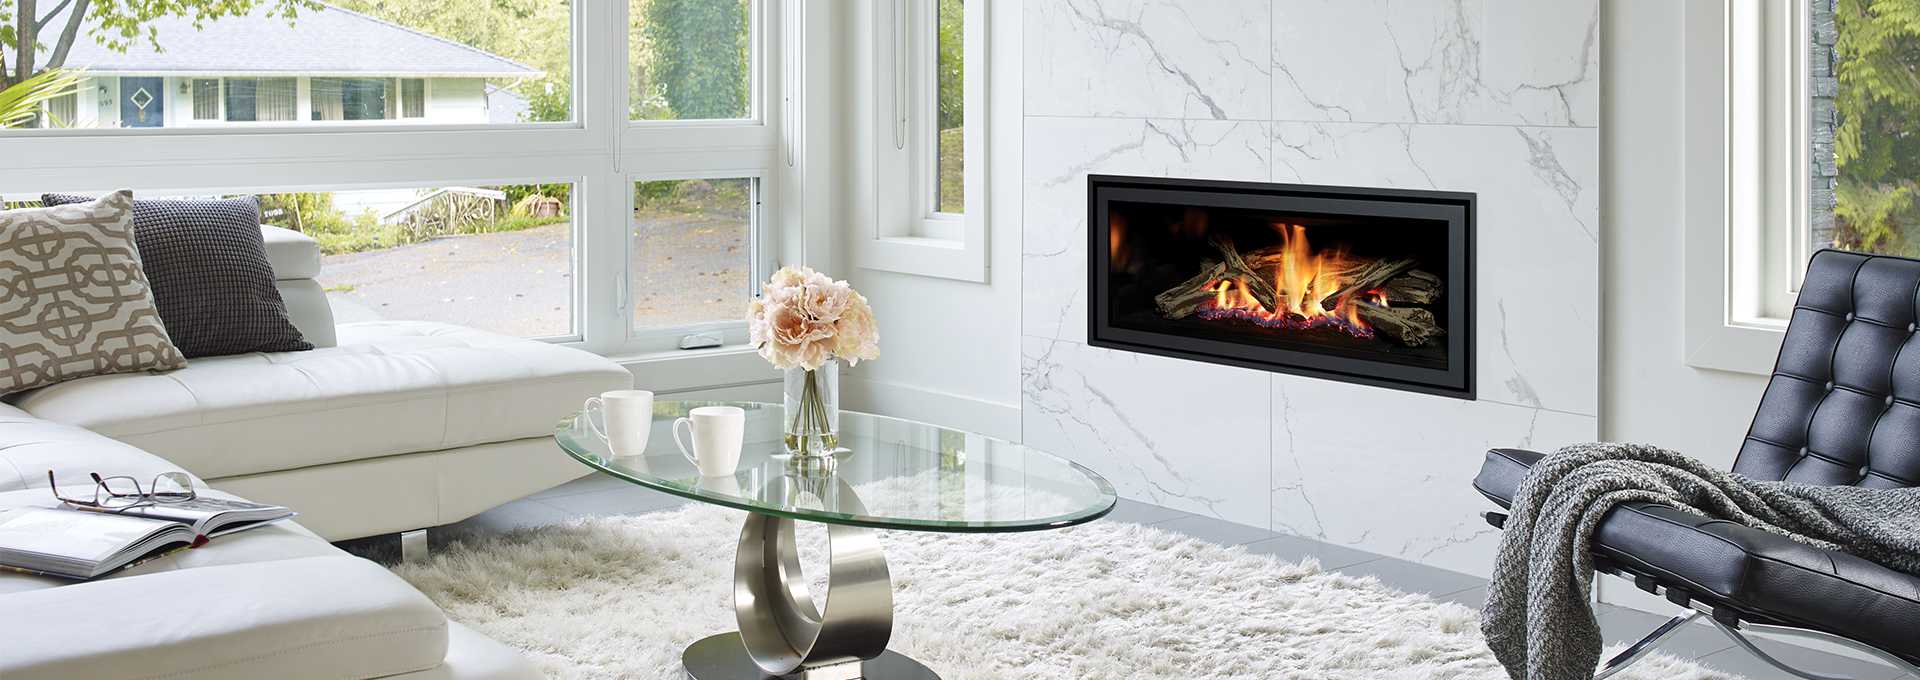 Contemporary Gas Fireplace Greenfire, Gas Fireplace Room Heater